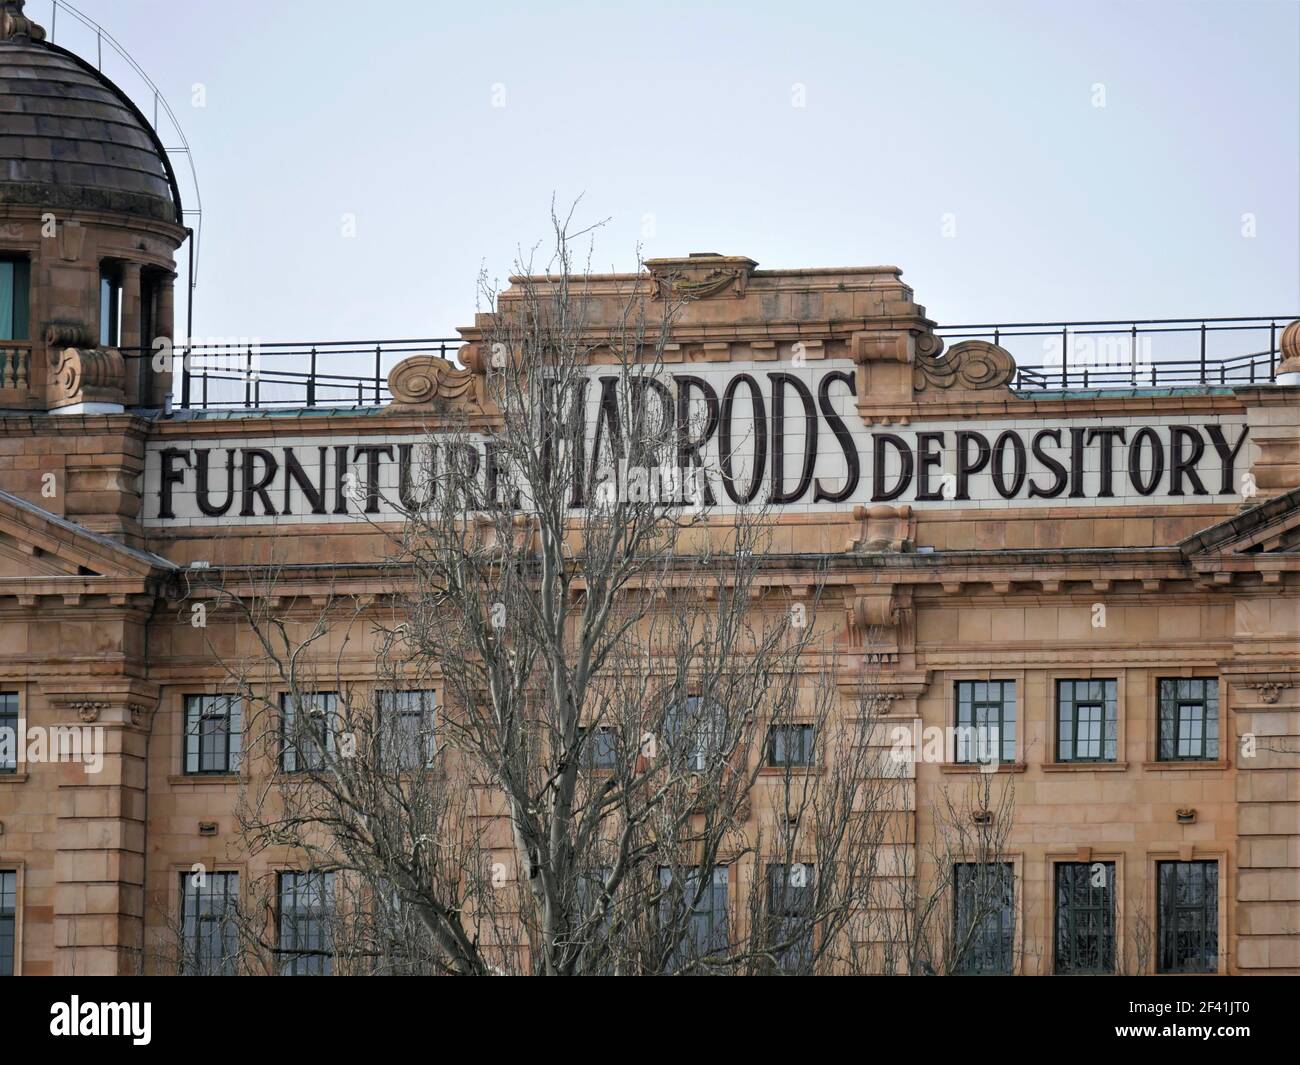 Harrods Furniture Depository Buildings on the South Bank of the River Thames near Hammersmith Bridge in Barnes, London, now known as Harrods Village Stockfoto